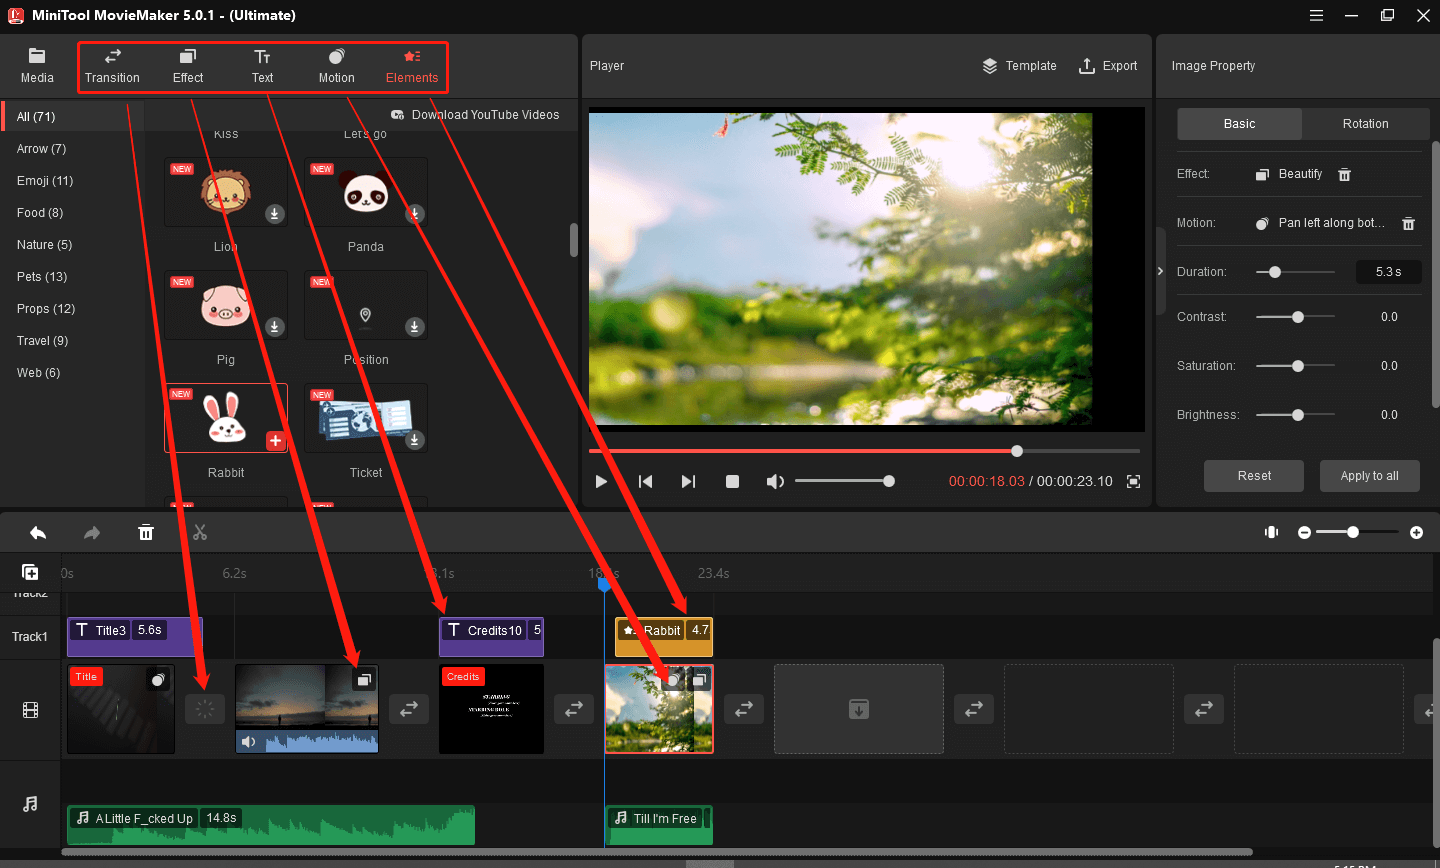 add transition, effect, text, motion, and elements to your video